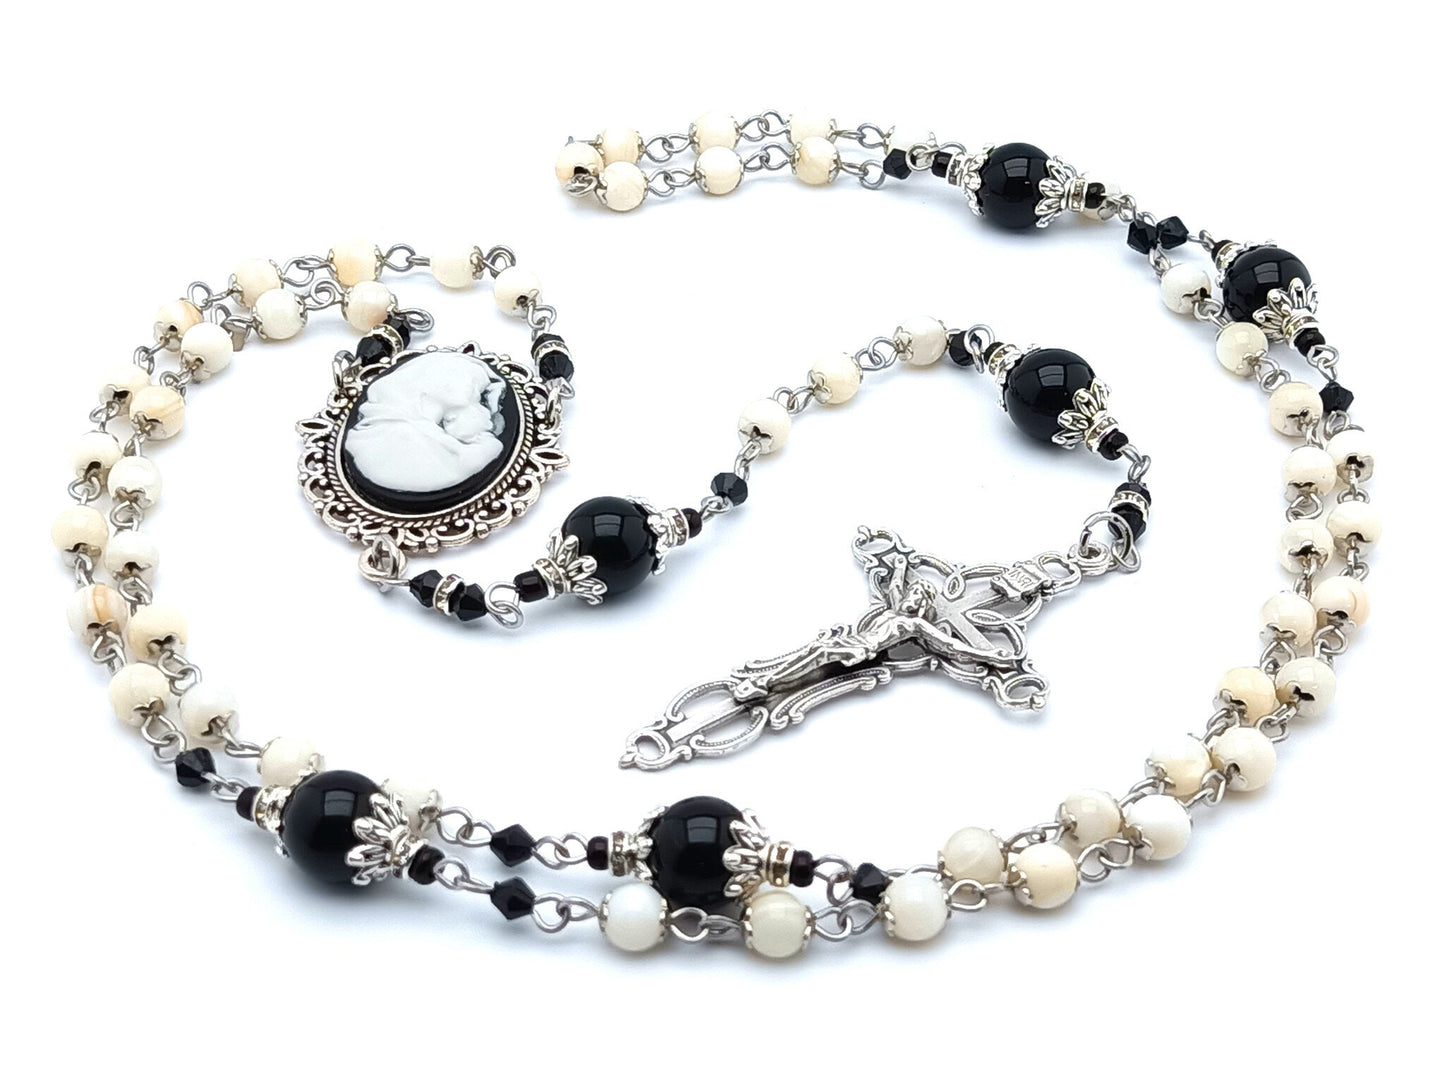 Madonna and child cameo unique rosary beads with mother of pearl and onyx rosary beads with filigree crucifix.